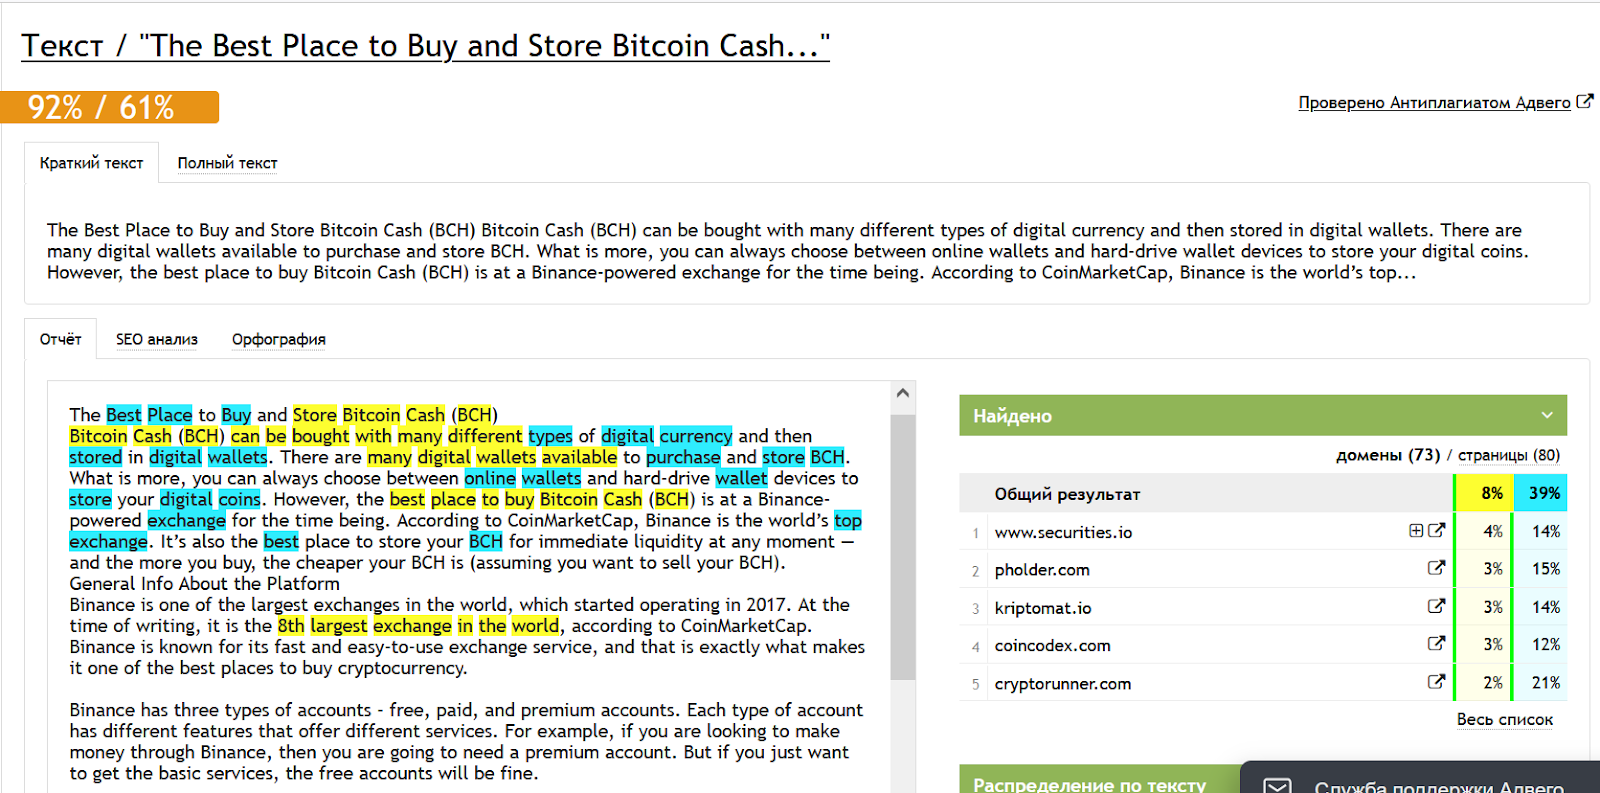 The best place to buy and store Bitcoin Cash (BCH) 2